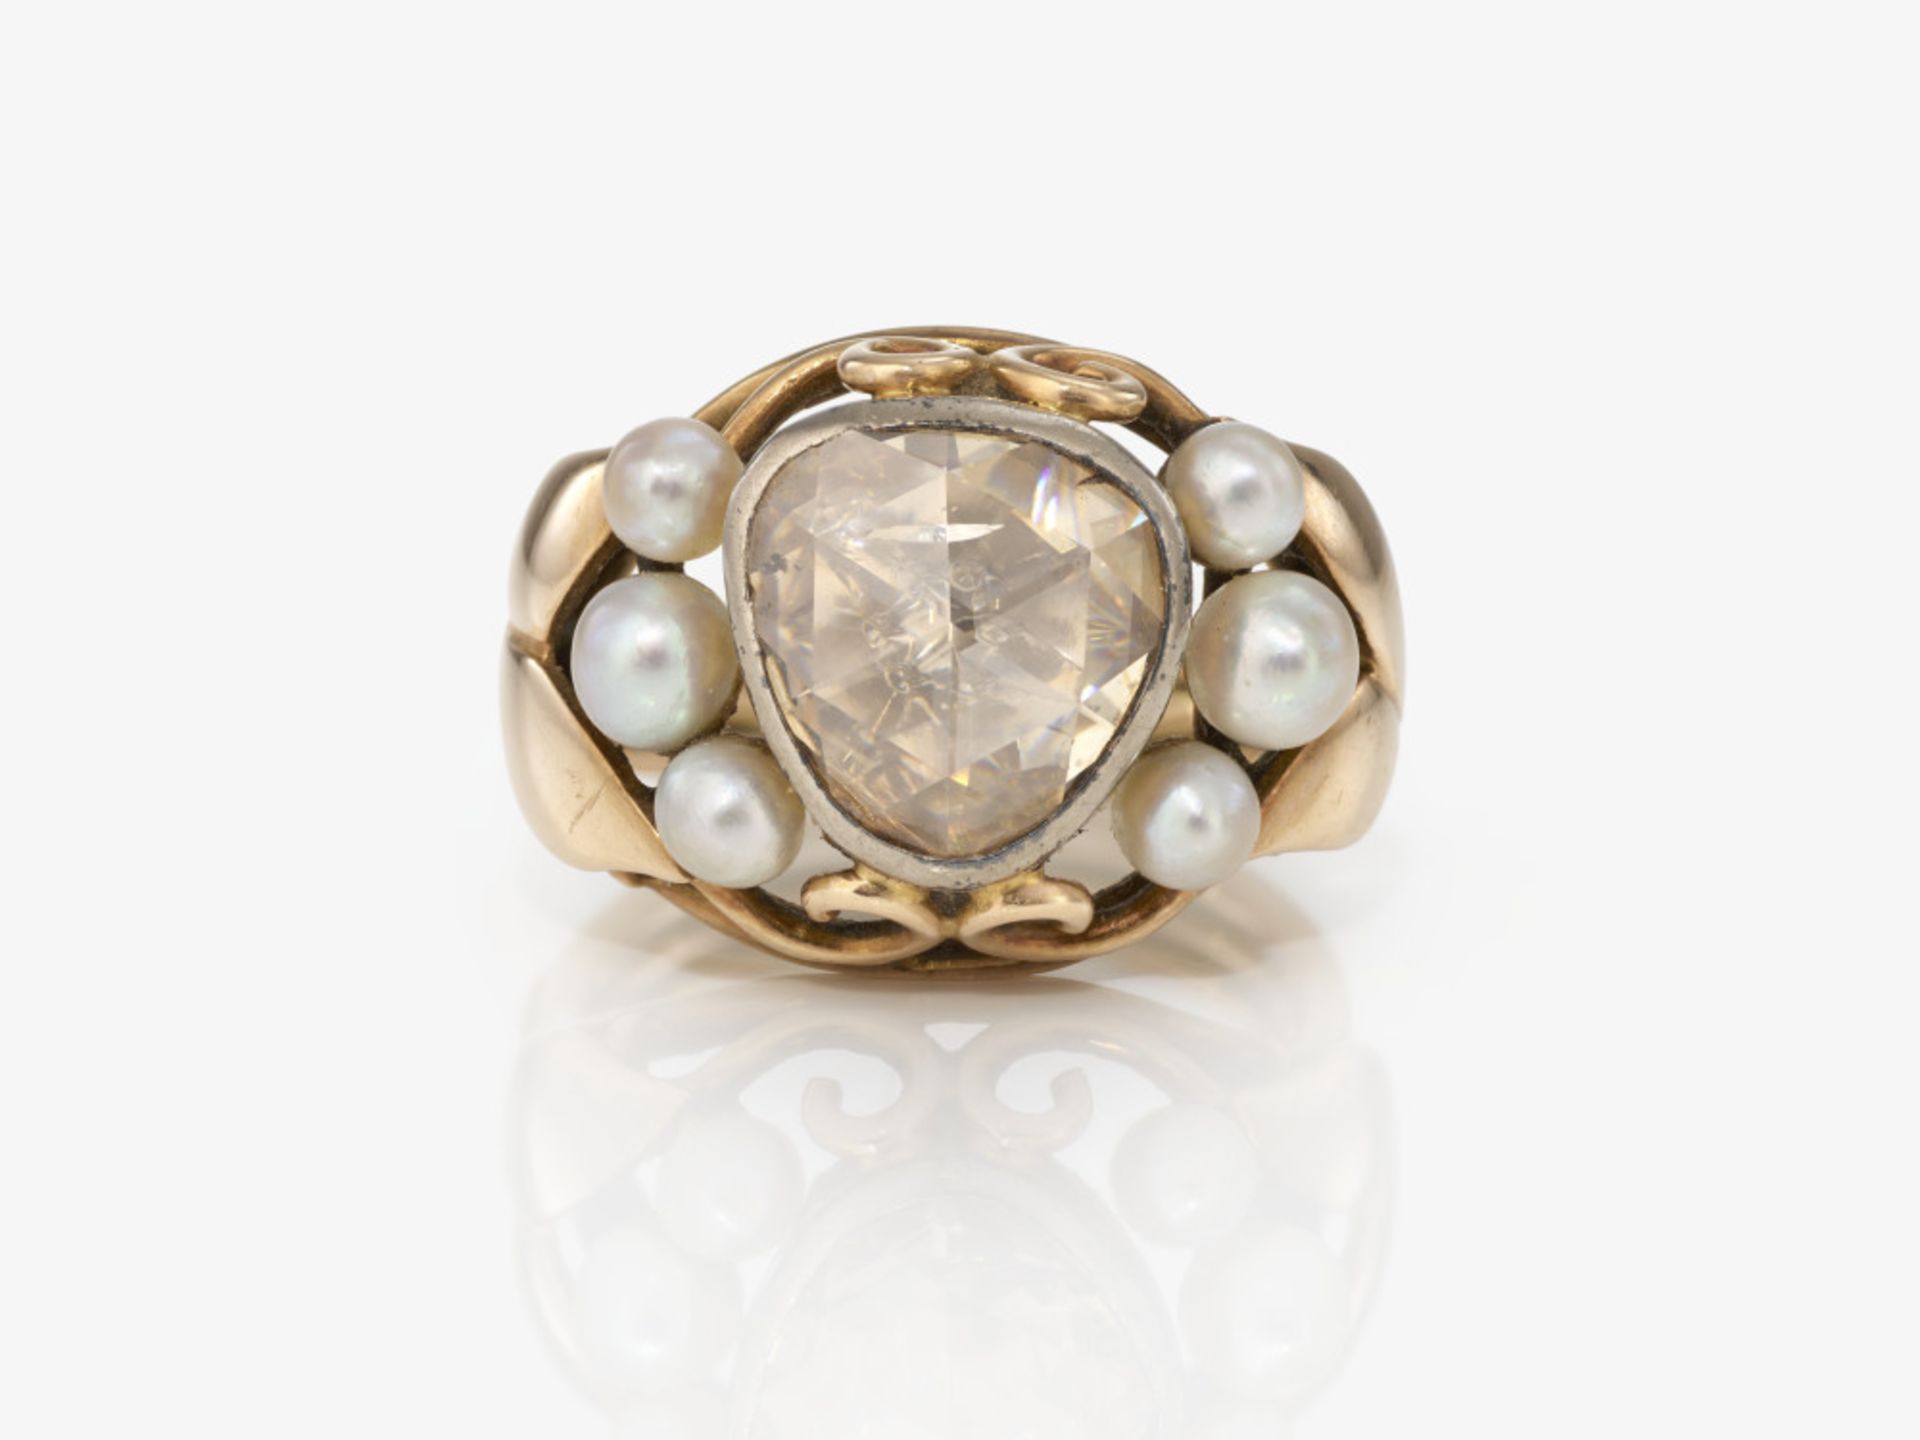 A ring with a large diamond and cultured pearls - Germany, the large diamond was cut in the 18th cen - Image 2 of 2